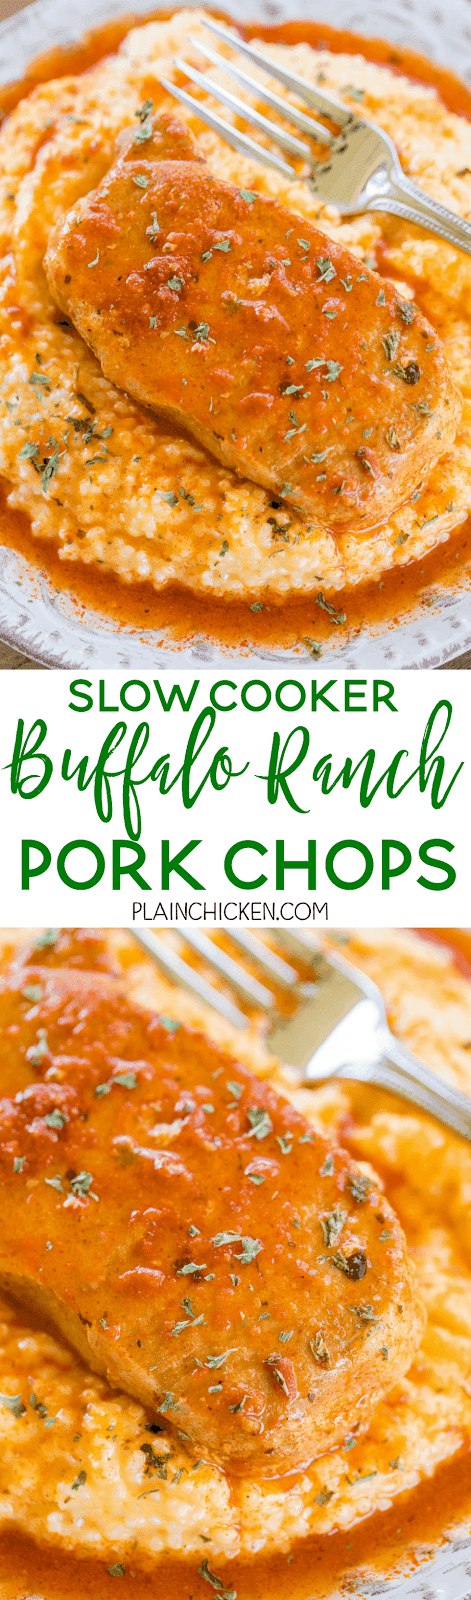 Slow Cooker Buffalo Ranch Pork Chops - only 3 ingredients! These are some of the best pork chops we've ever eaten! So simple and SOOOO good!!!! Everyone cleaned their plate! Great for watching football! Serve over cheddar ranch grits! TO-DIE-FOR! YUM!